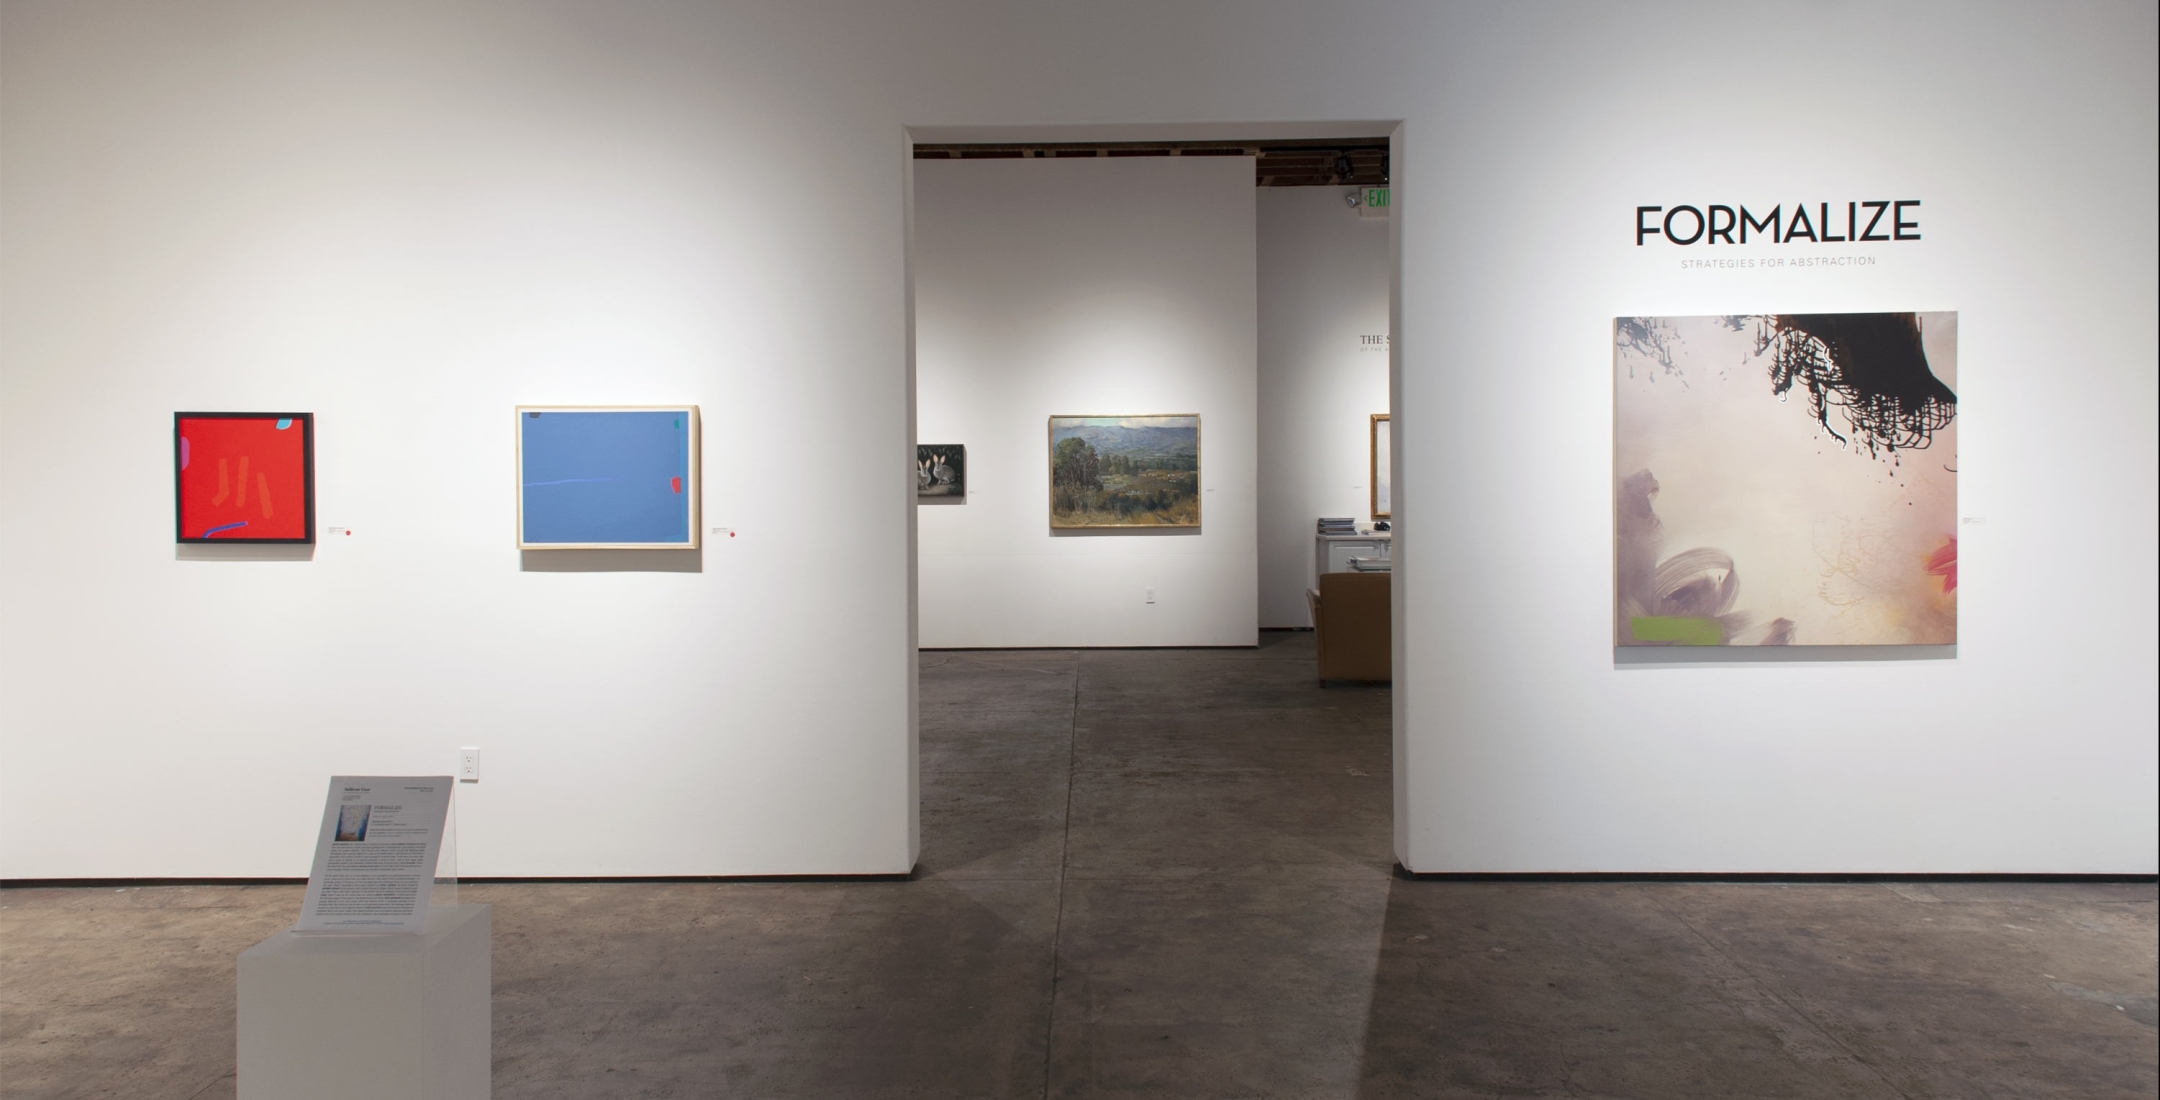 Installation view of the exhibition Formalize: Strategies for Abstaction